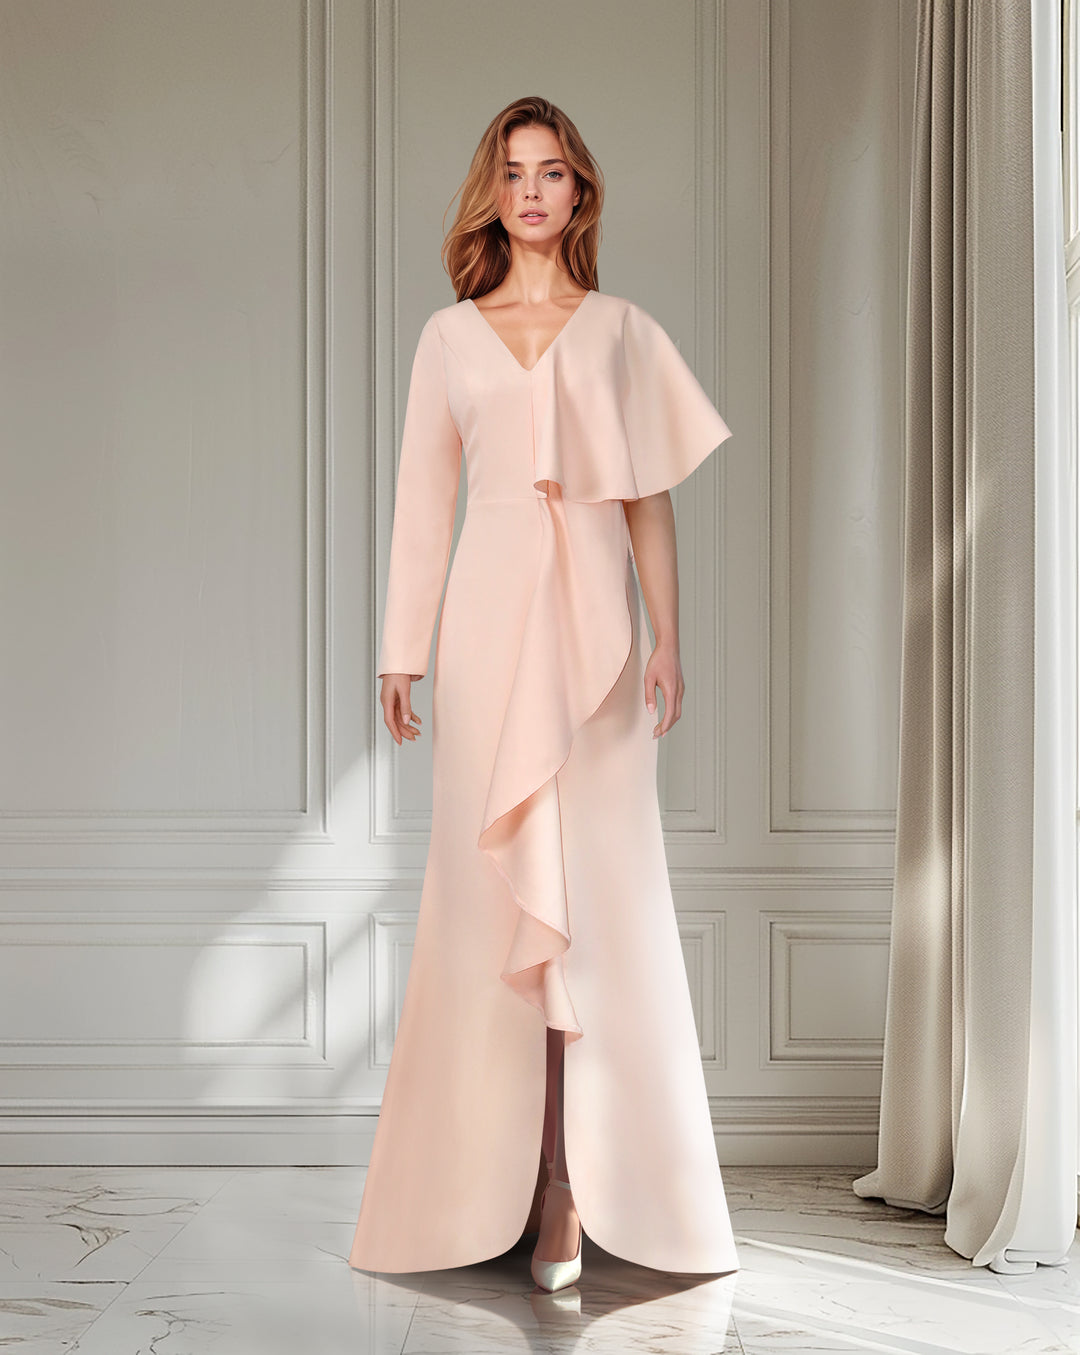 Ruffled pink dress with asymmetrical sleeves - ODD-Surinder